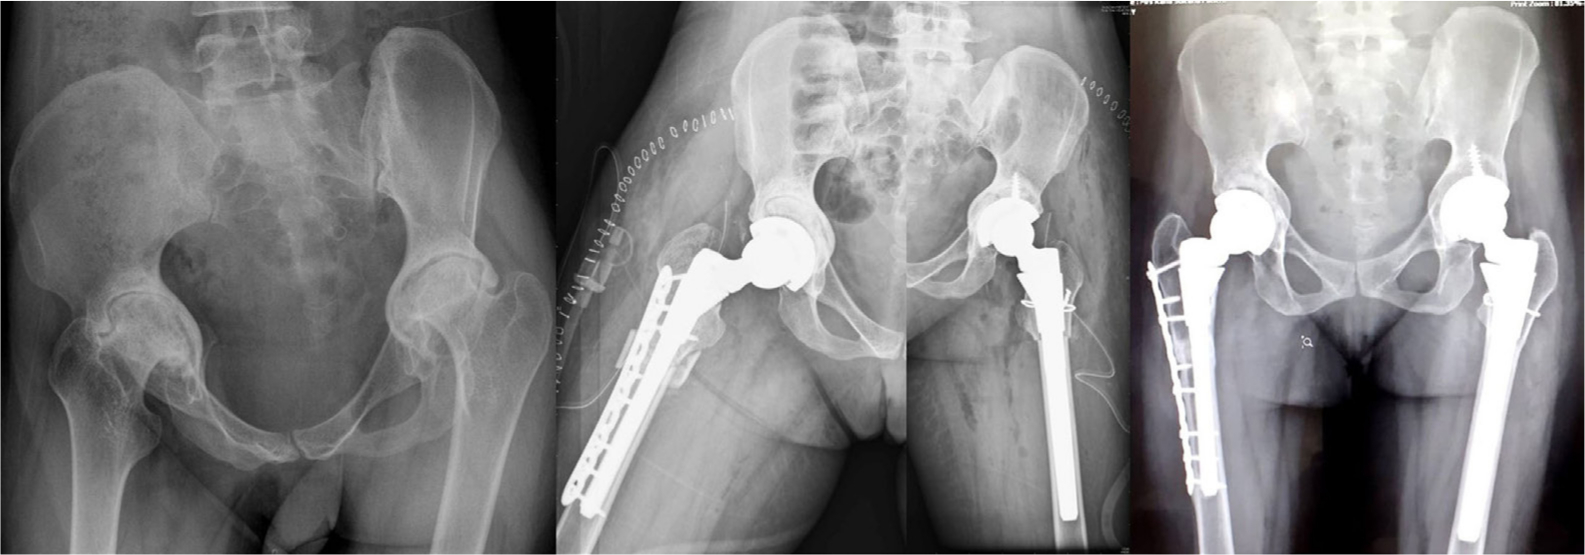 Fig. 3 
          21-year-old female with juvenile rheumatoid arthritis with bilateral type 3b acetabulum defect with 'for review only' protrusio, bilateral femoral shortening with plate for right femur for additional stability, and SS wiring for the proximal fragment for intraoperative split. Acetabulum impaction grafting with femoral head blocks, restored centre of rotation. 36-month follow-up with implant position well maintained and osteotomy site well united bilaterally. Acetabulum graft well incorporated. The combined offset measures 72.2 mm left and 72.8 mm right; the horizontal offset was 35.3 mm and 41.1 mm respectively without significant lateralization.
        